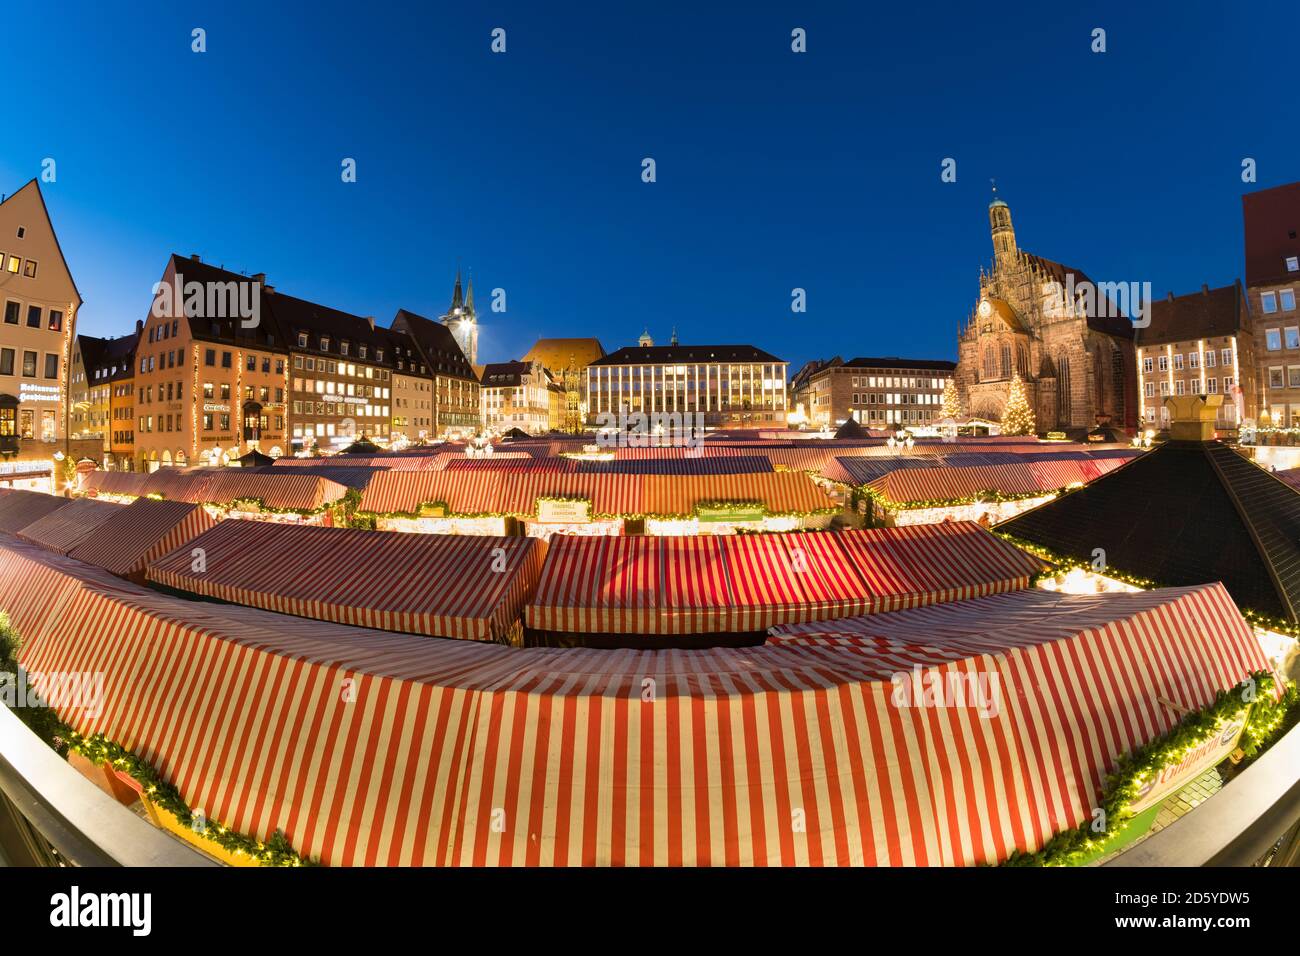 Germany, Nuremberg, view to Church of Our Lady and roofs of Christkindlmarkt Stock Photo